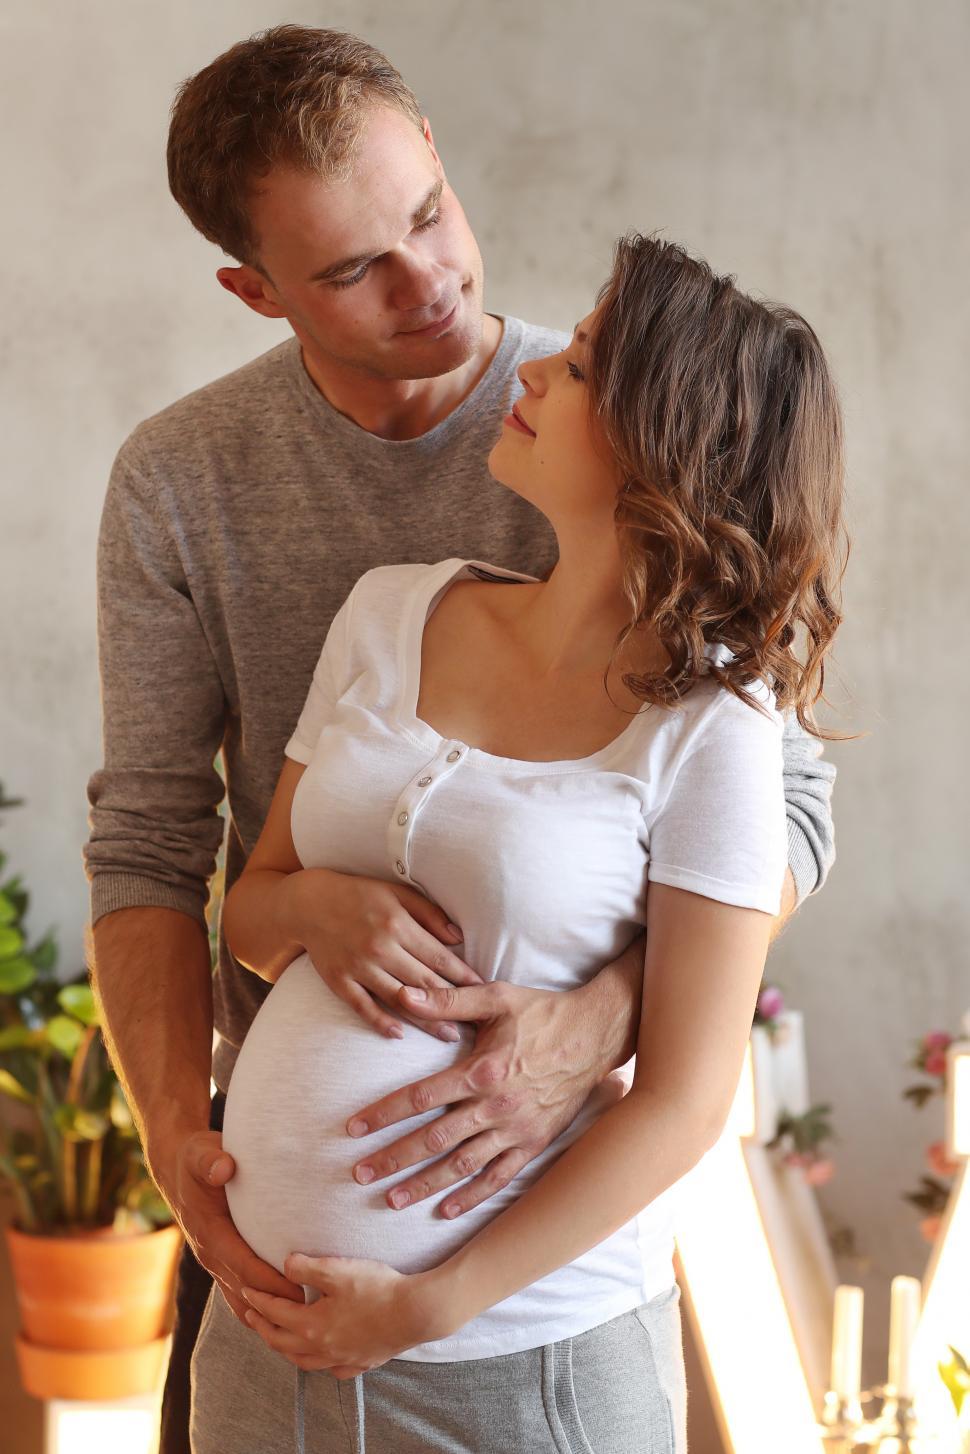 Free Image of Pregnant couple share a moment together 